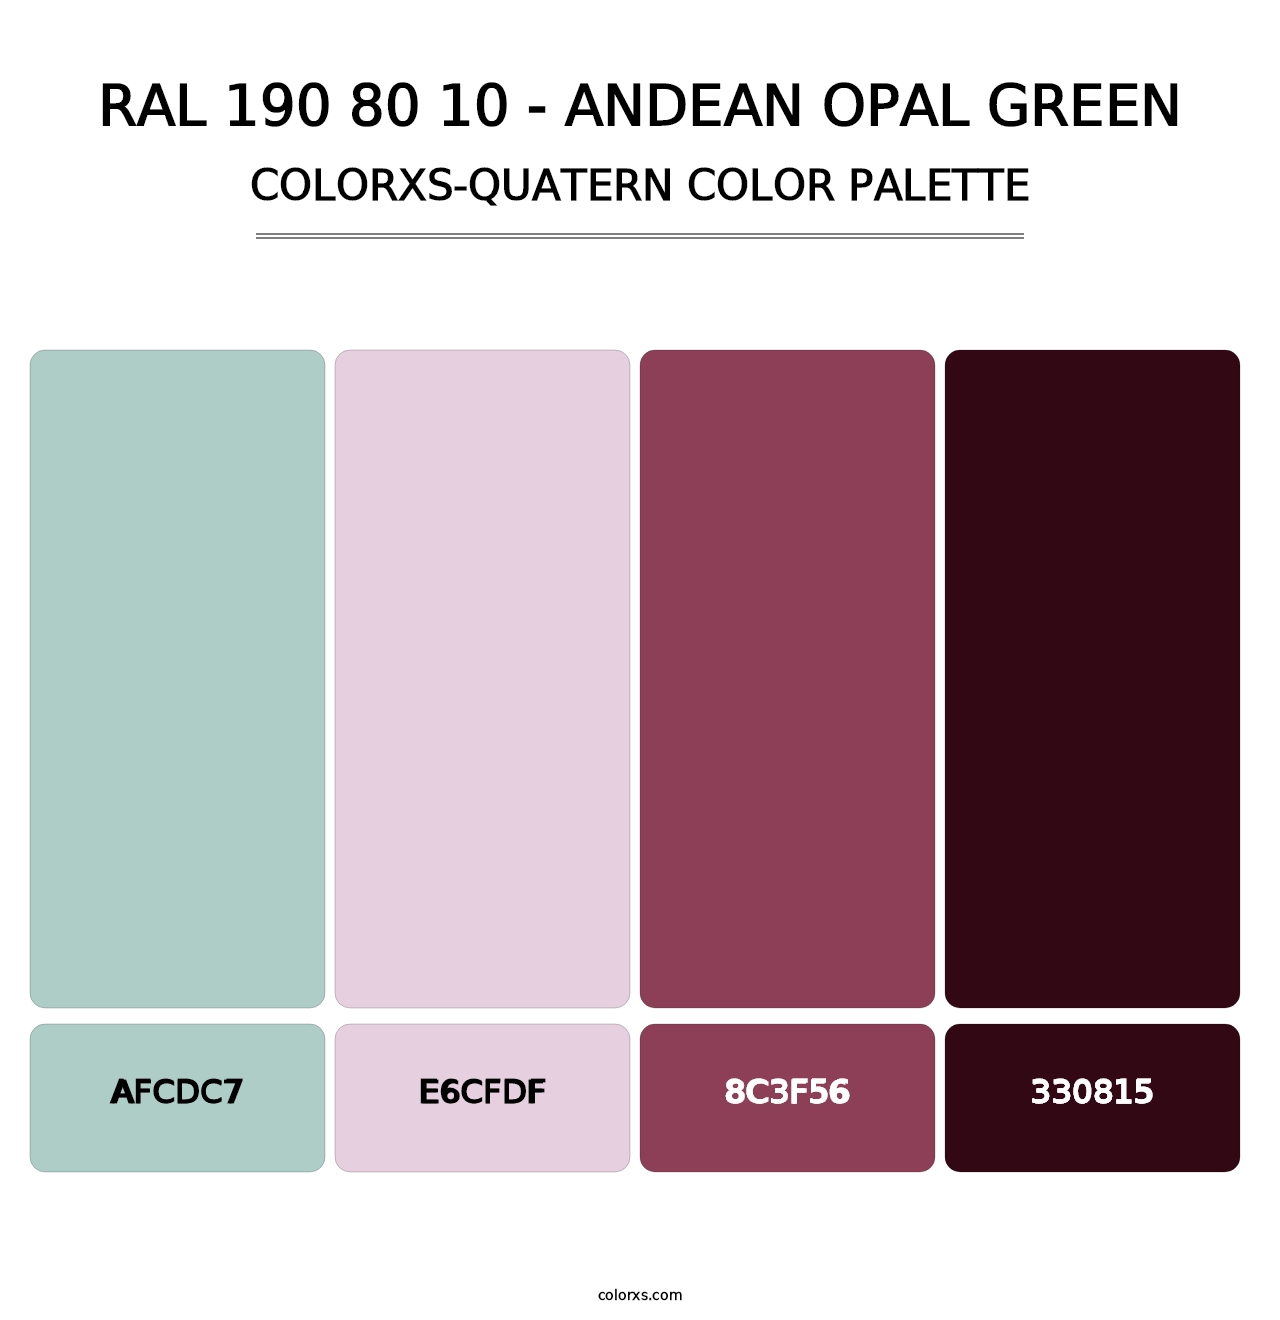 RAL 190 80 10 - Andean Opal Green - Colorxs Quatern Palette